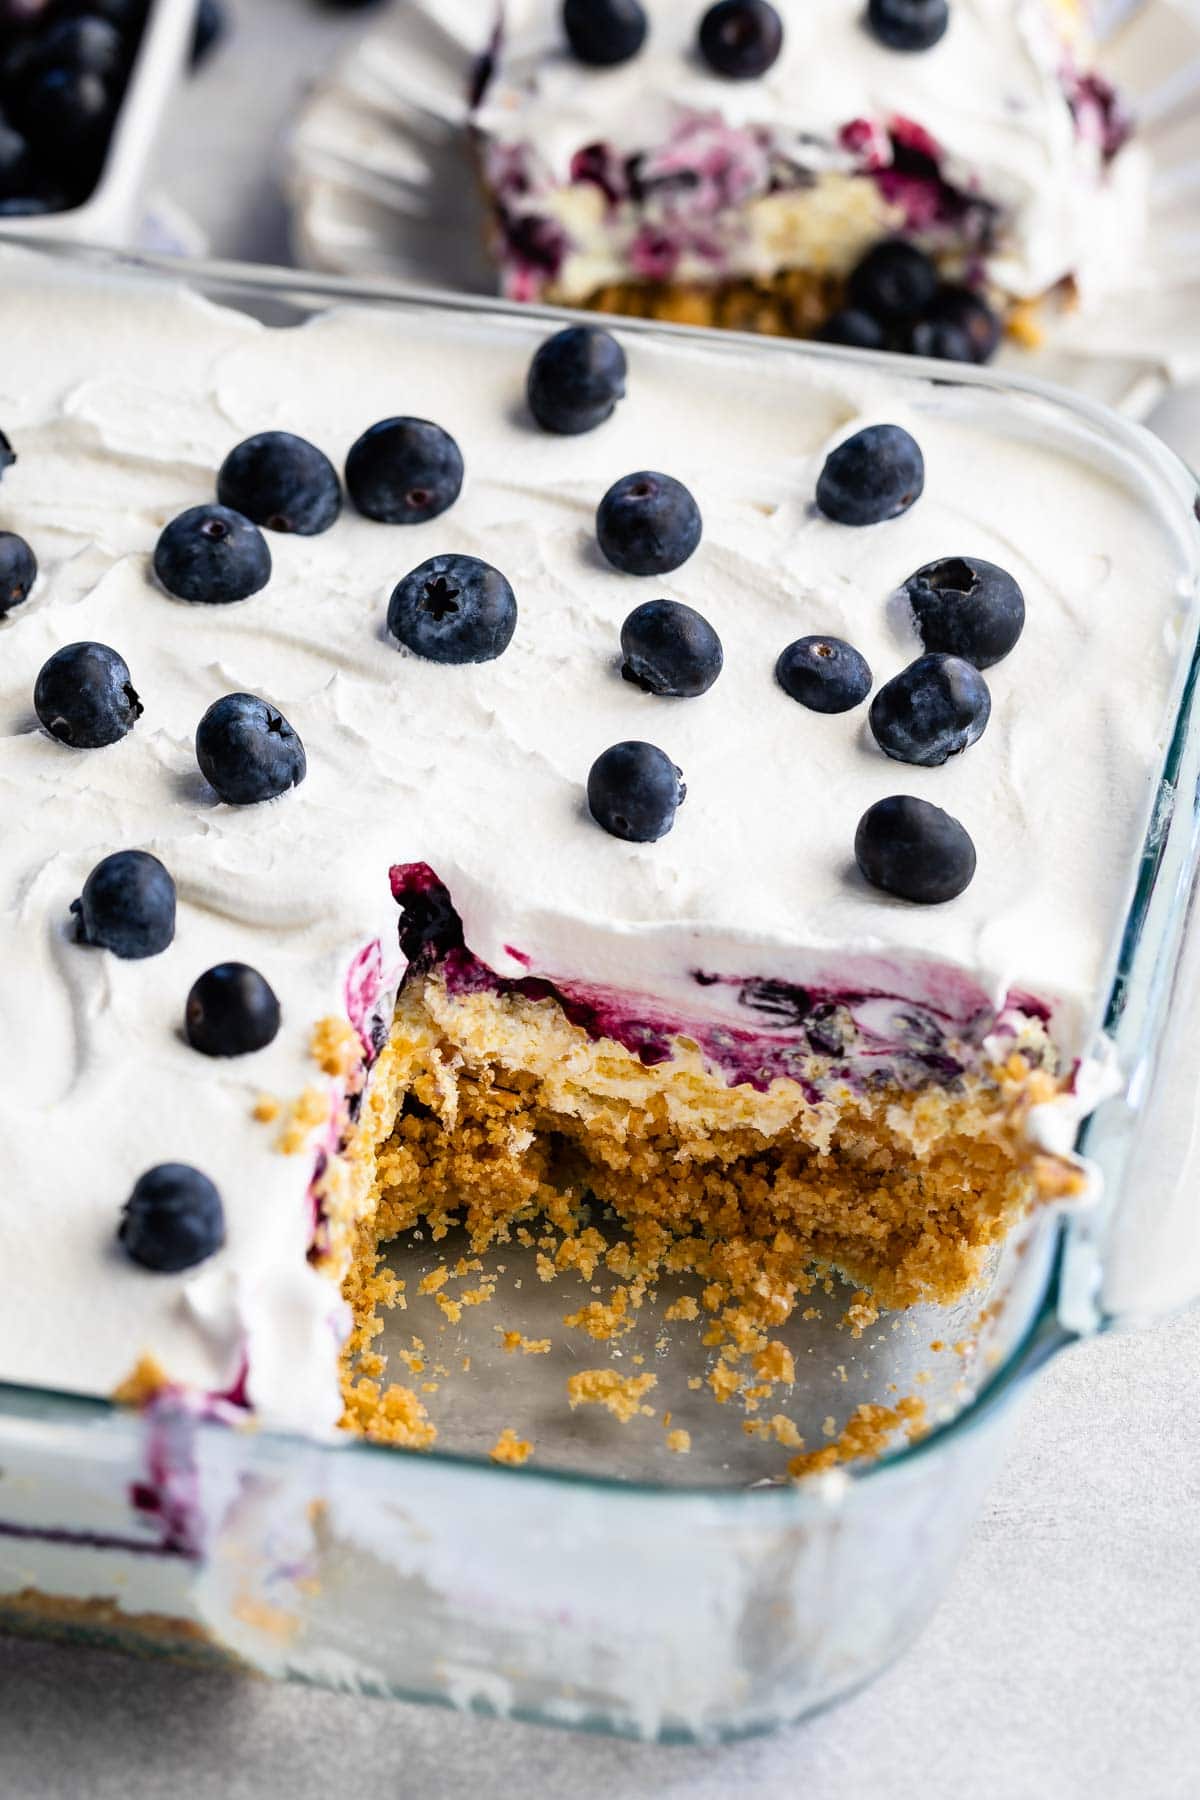 Blueberry delight lush in cake pan with corner piece missing